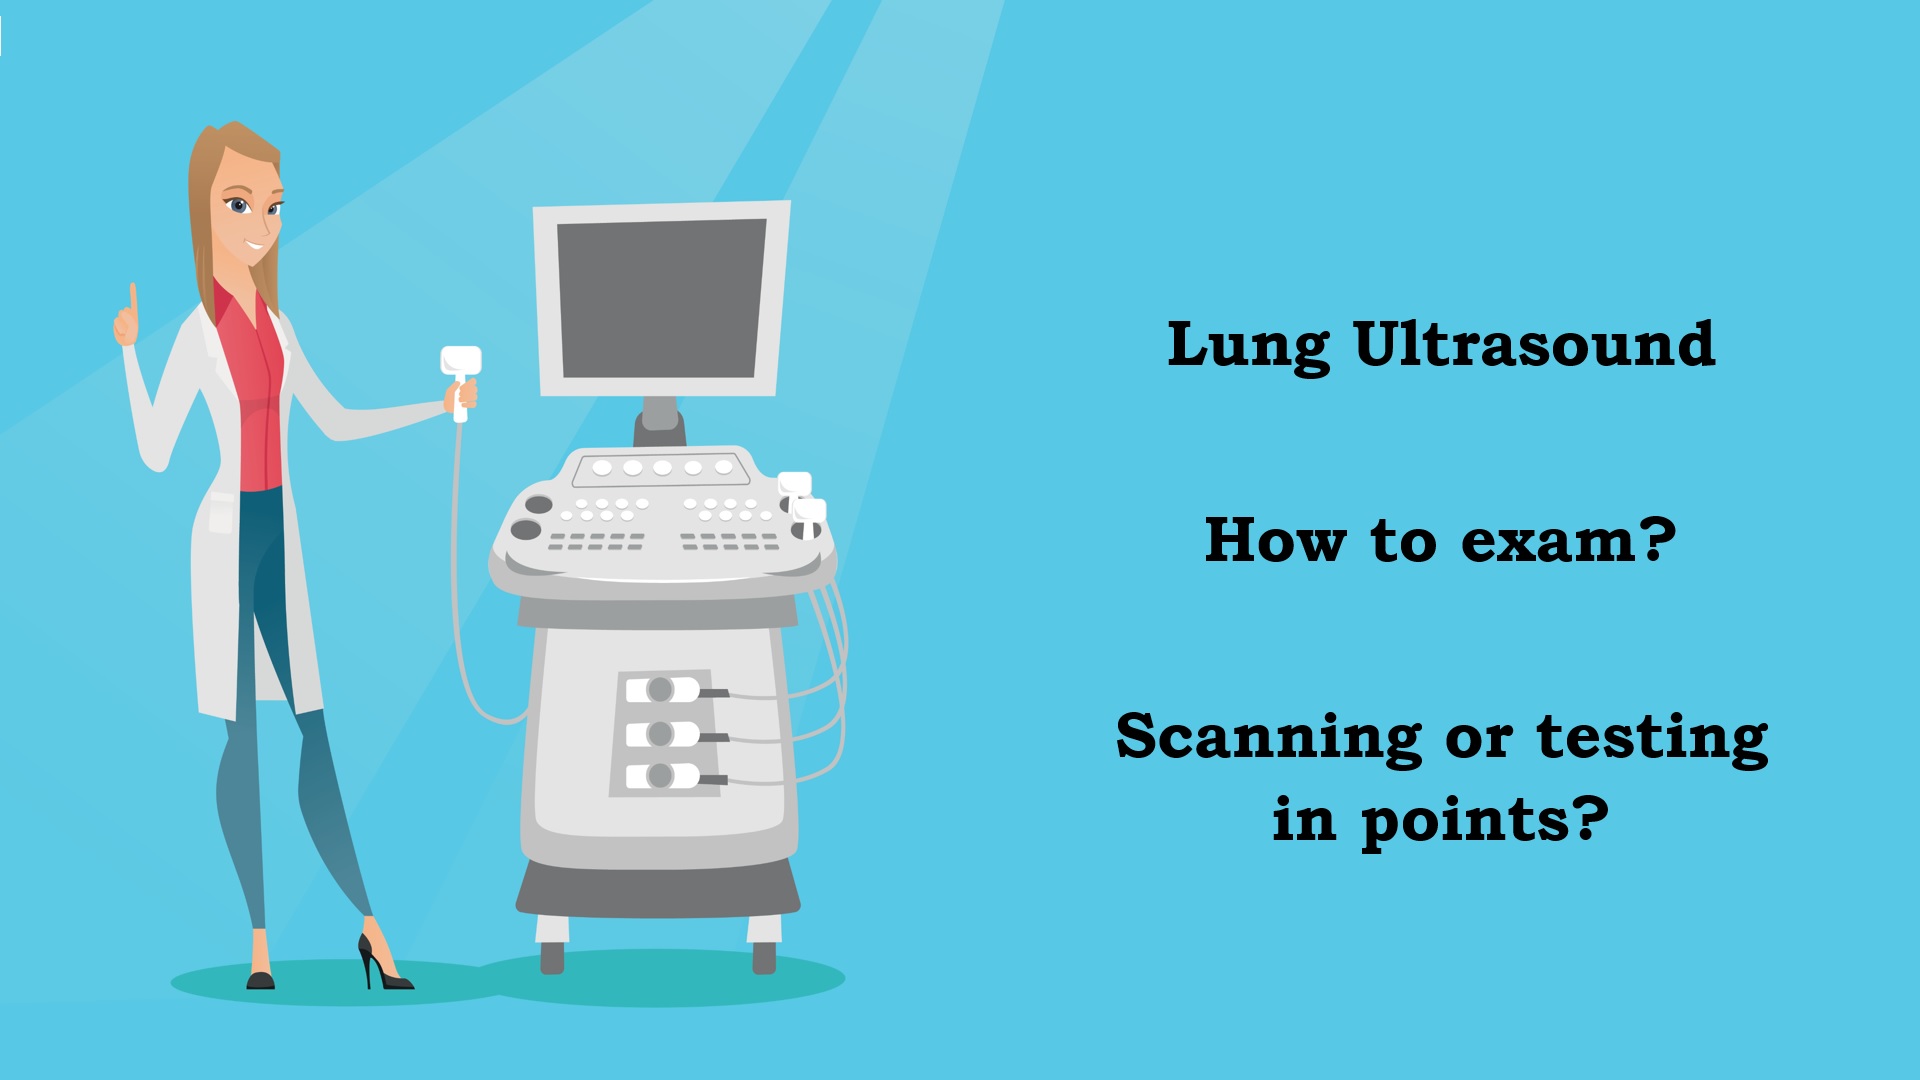 Lung Ultrasound. How to exam? Scanning or examining in points?